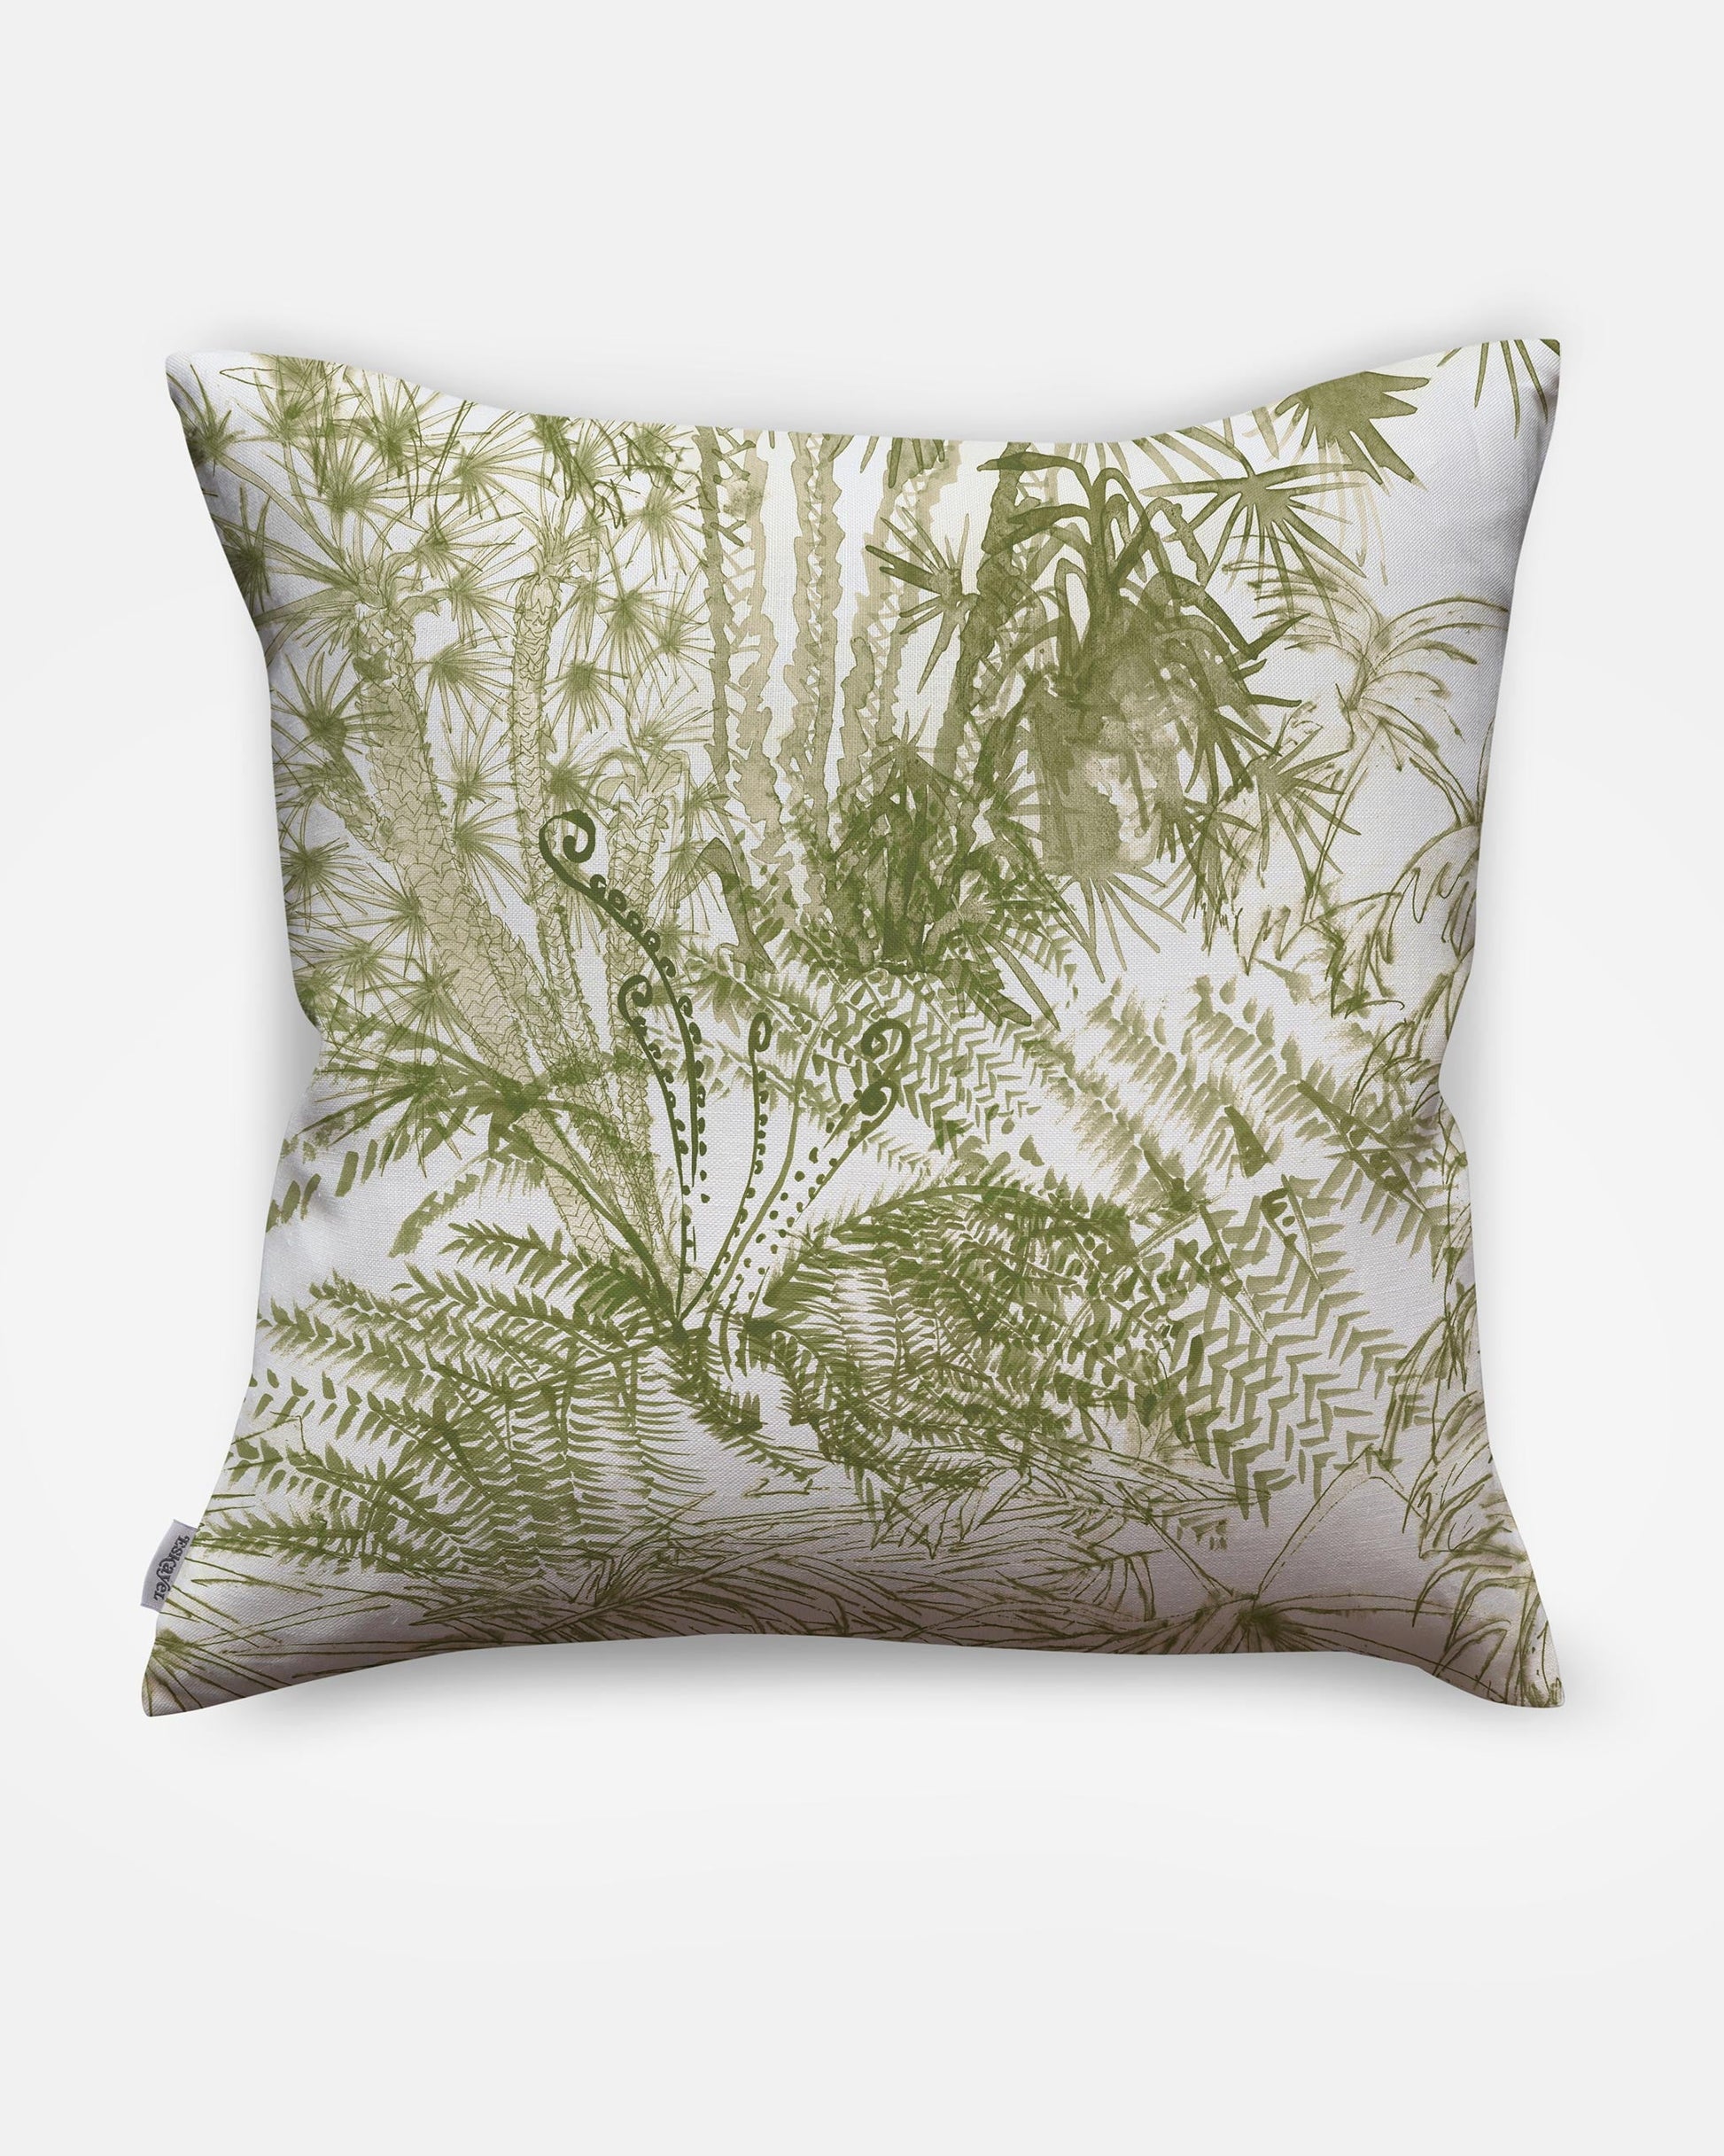 A green and white Domenica Pillow Brush with ferns on it